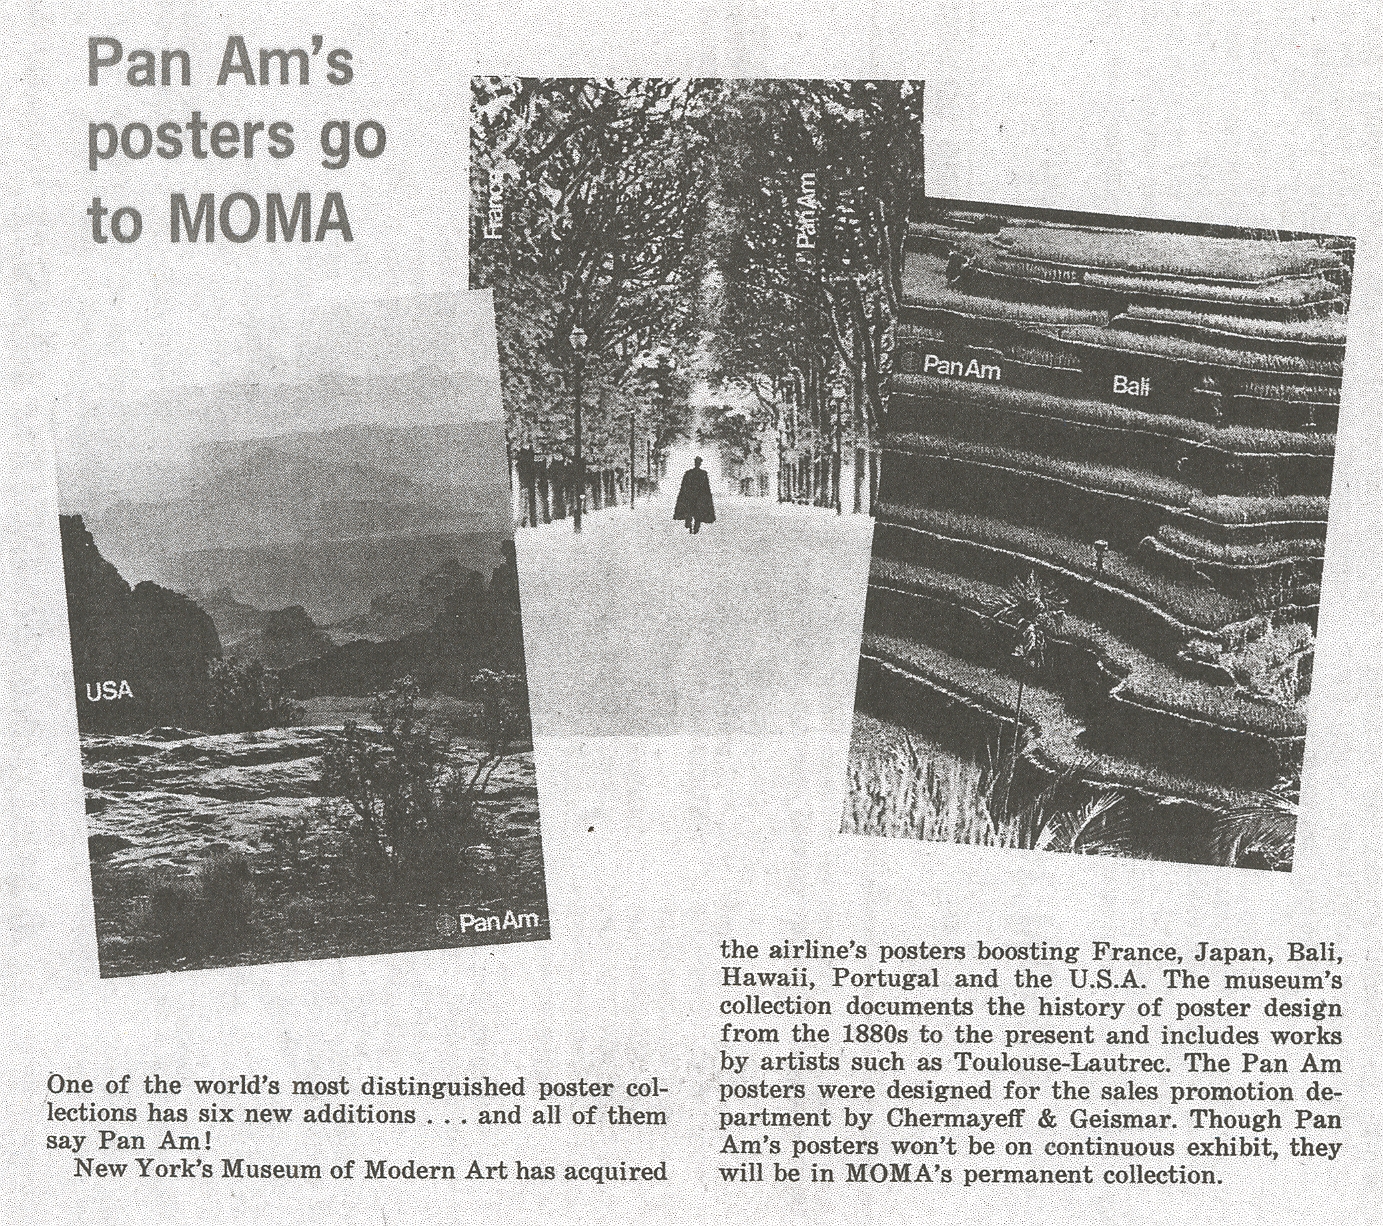 An article explaining how some of Pan Am's early 1970s posters were selected to join the collection of the New York Museum of Modern Art.